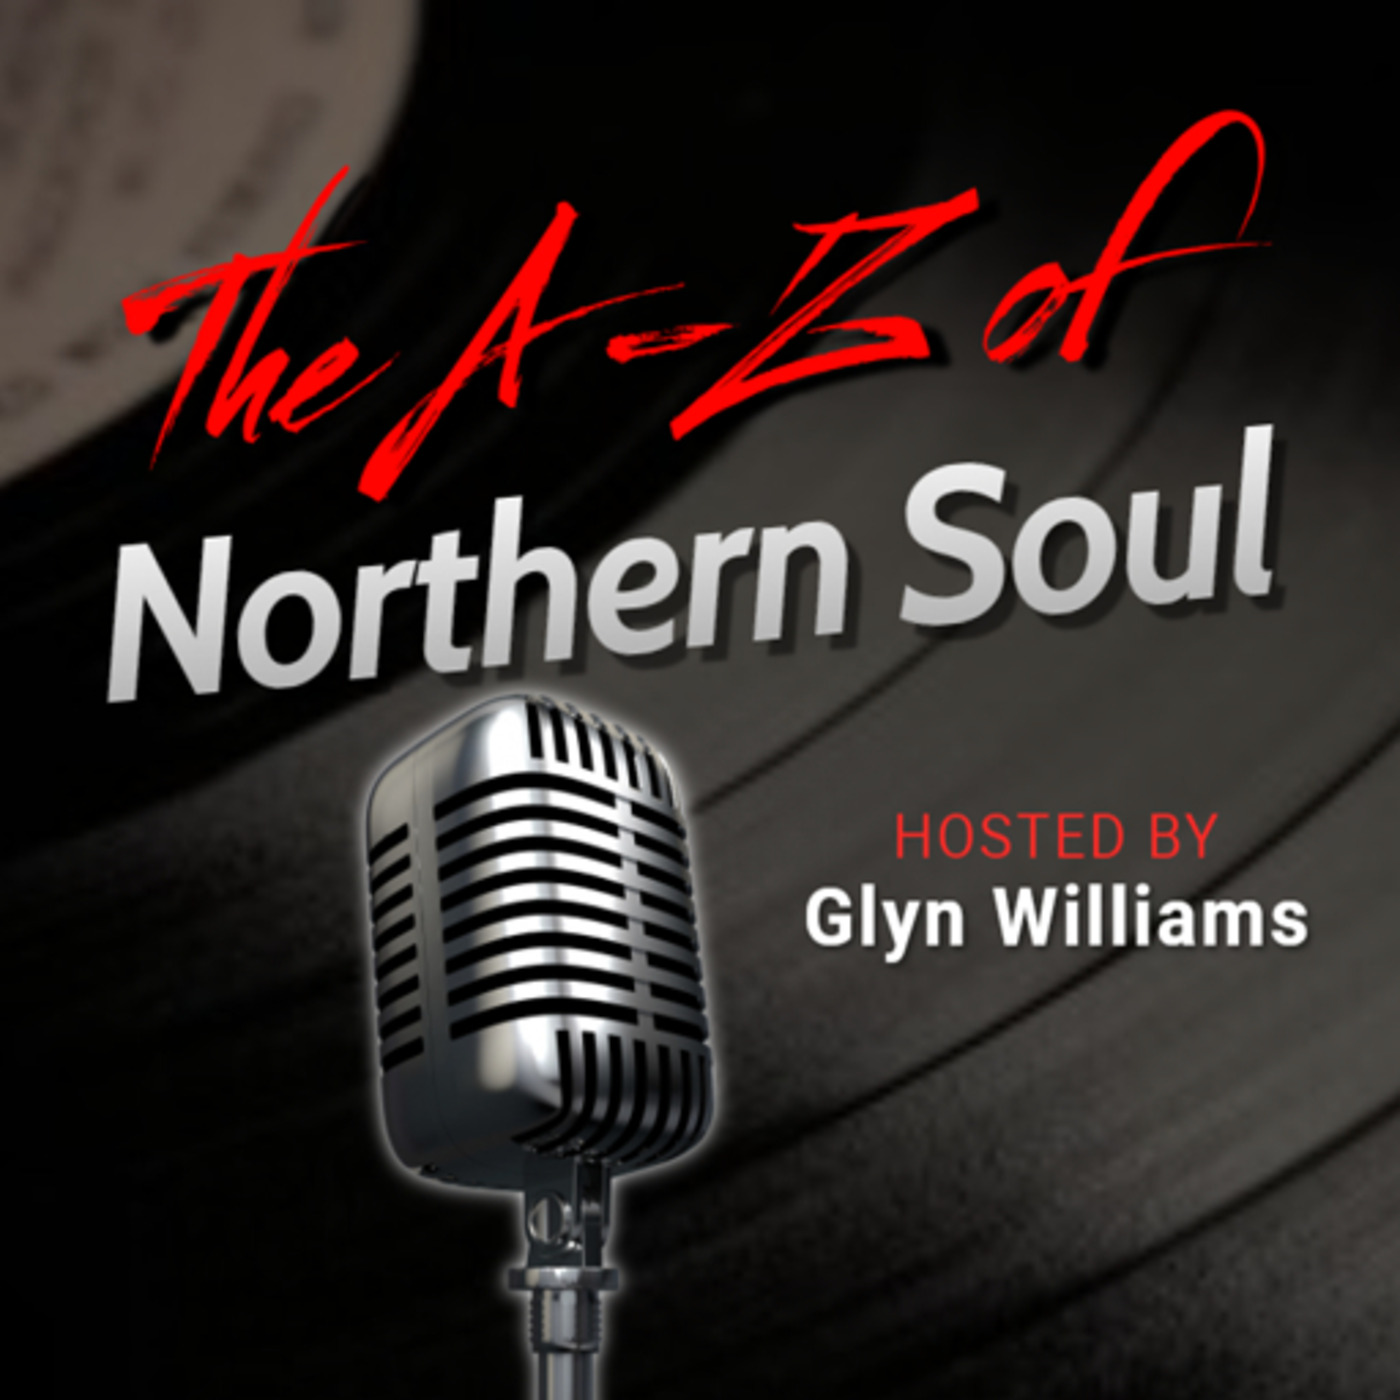 The A-Z of Northern Soul E005